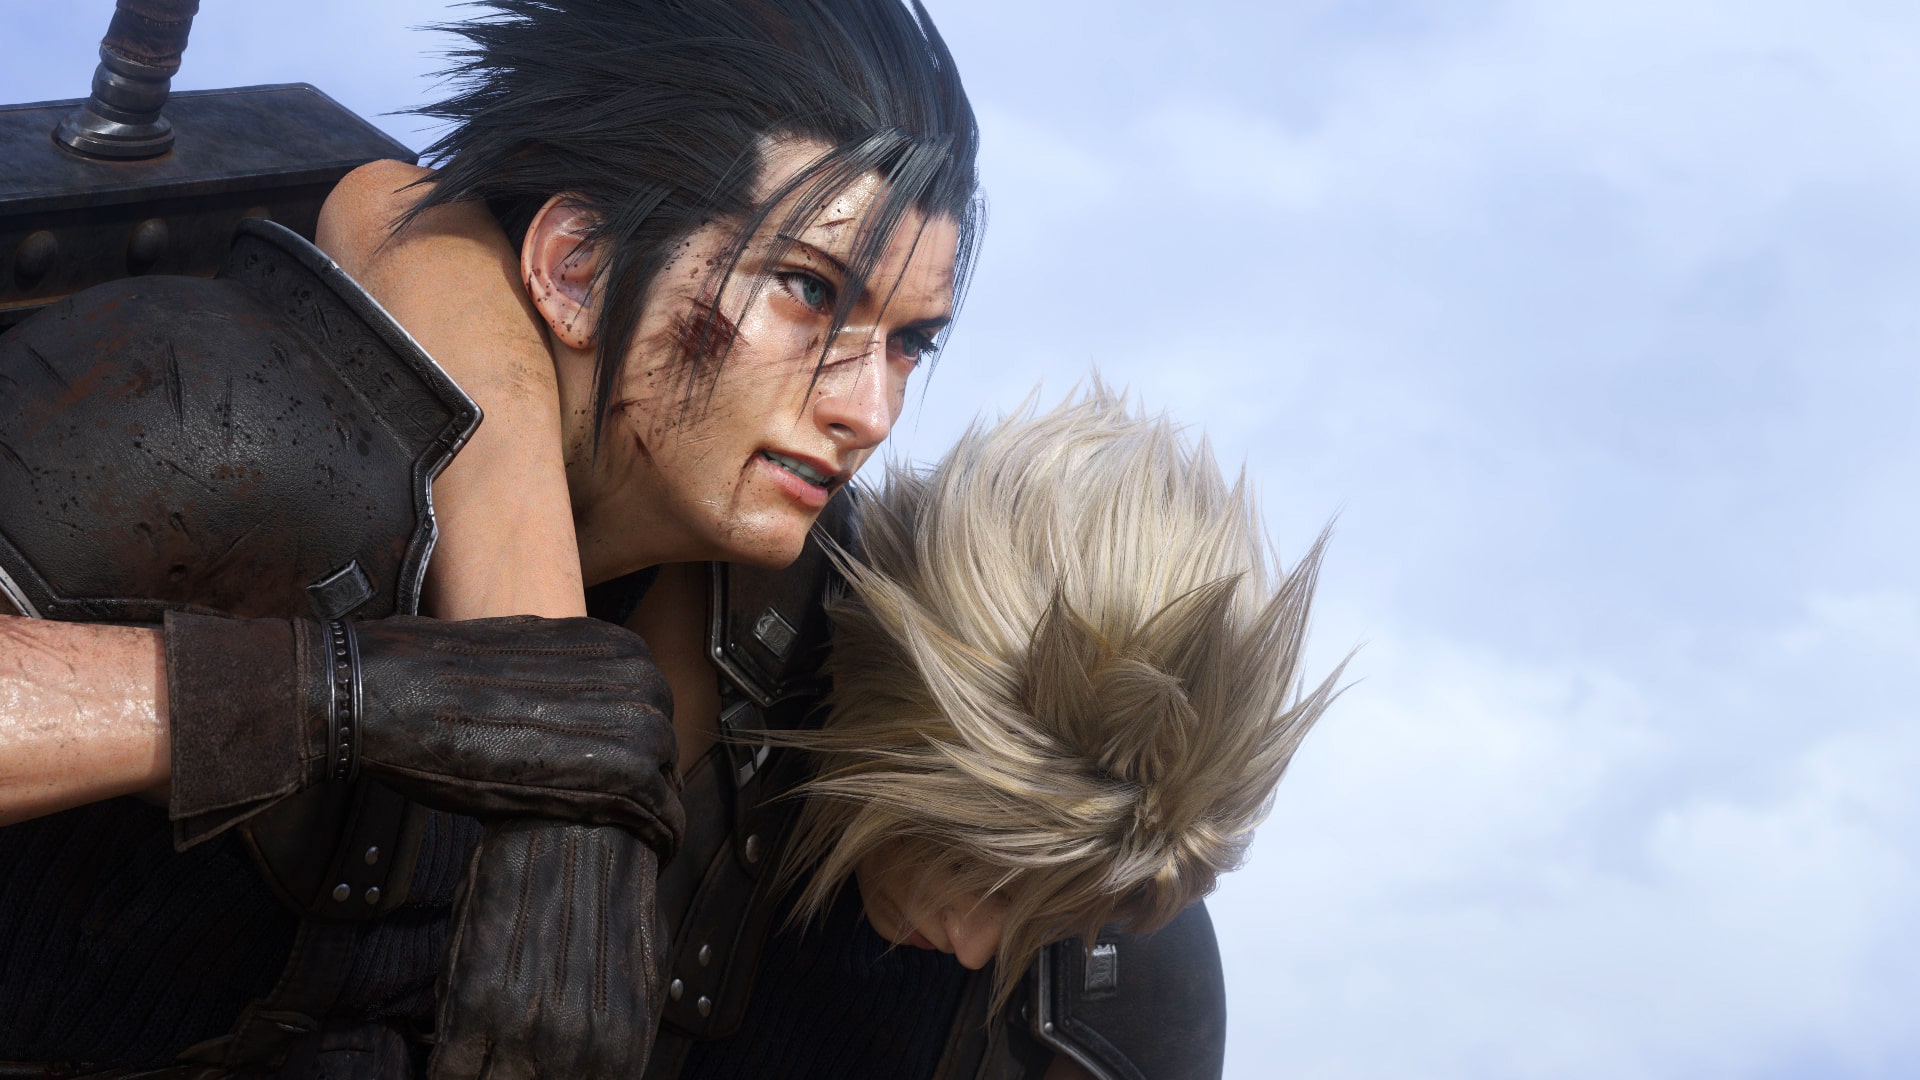 Zack and Cloud from Final Fantasy VII Rebirth